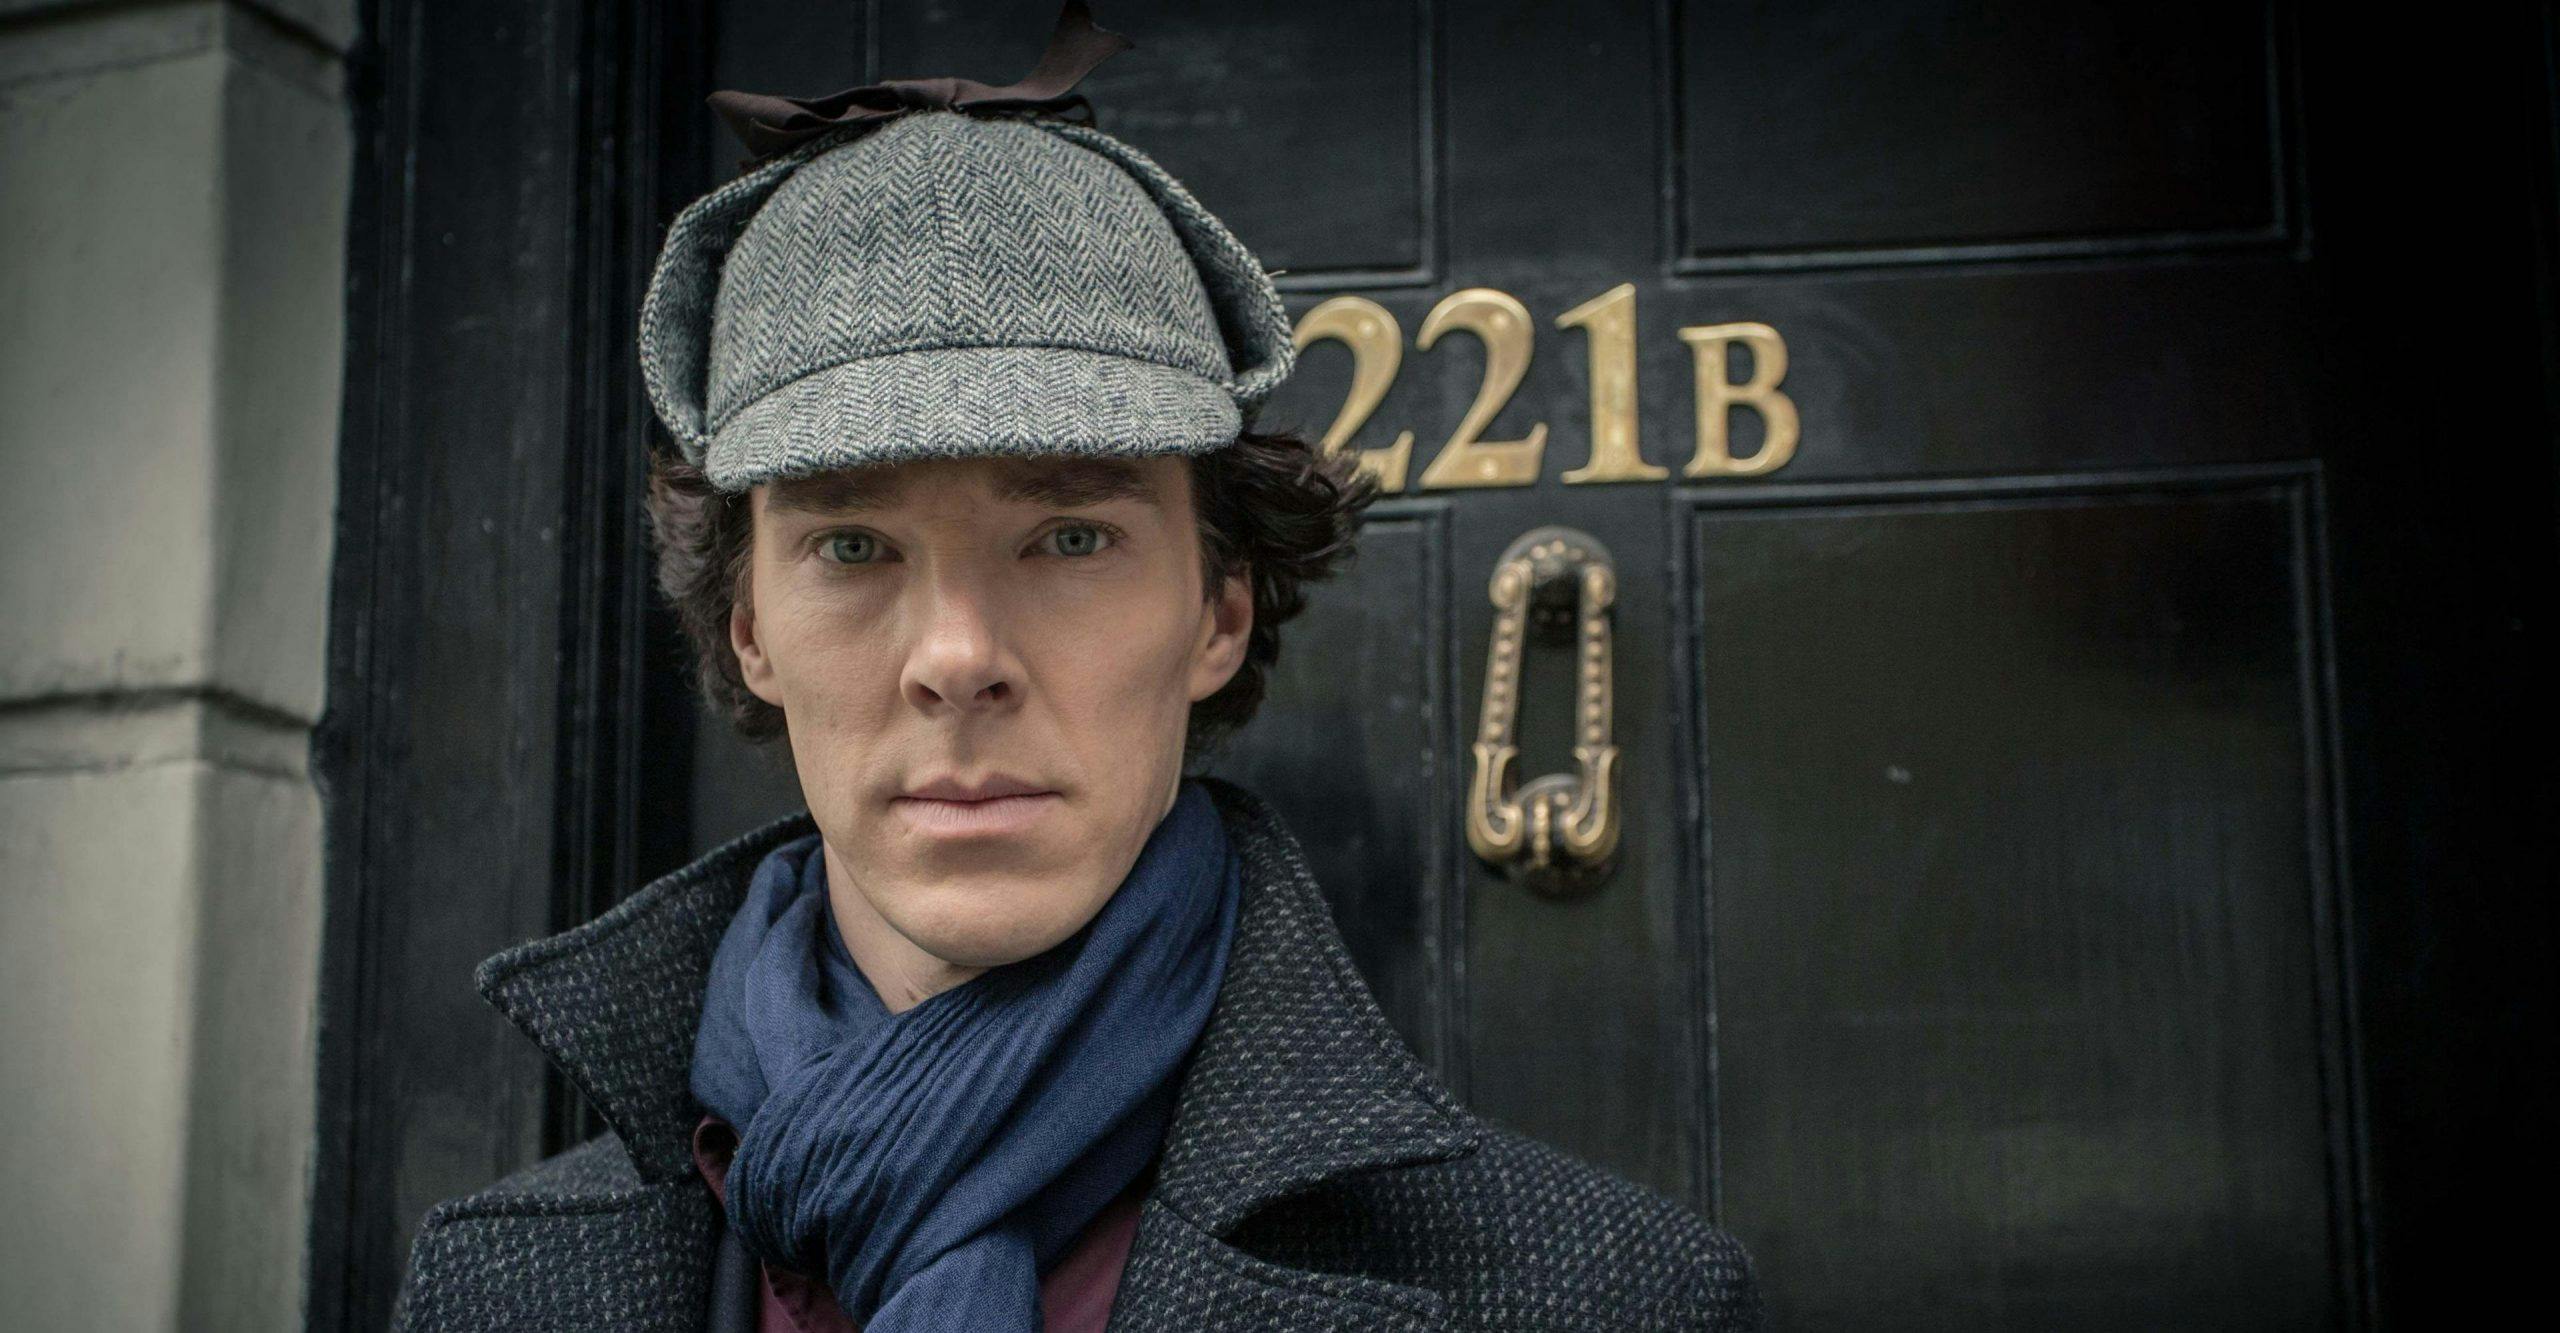 Benedict Cumberbatch as Sherlock Holmes wears a grey deerstalker cap, navy scarf and dark grey jacket and stands in front of a black door that has the address 221B written in gold.